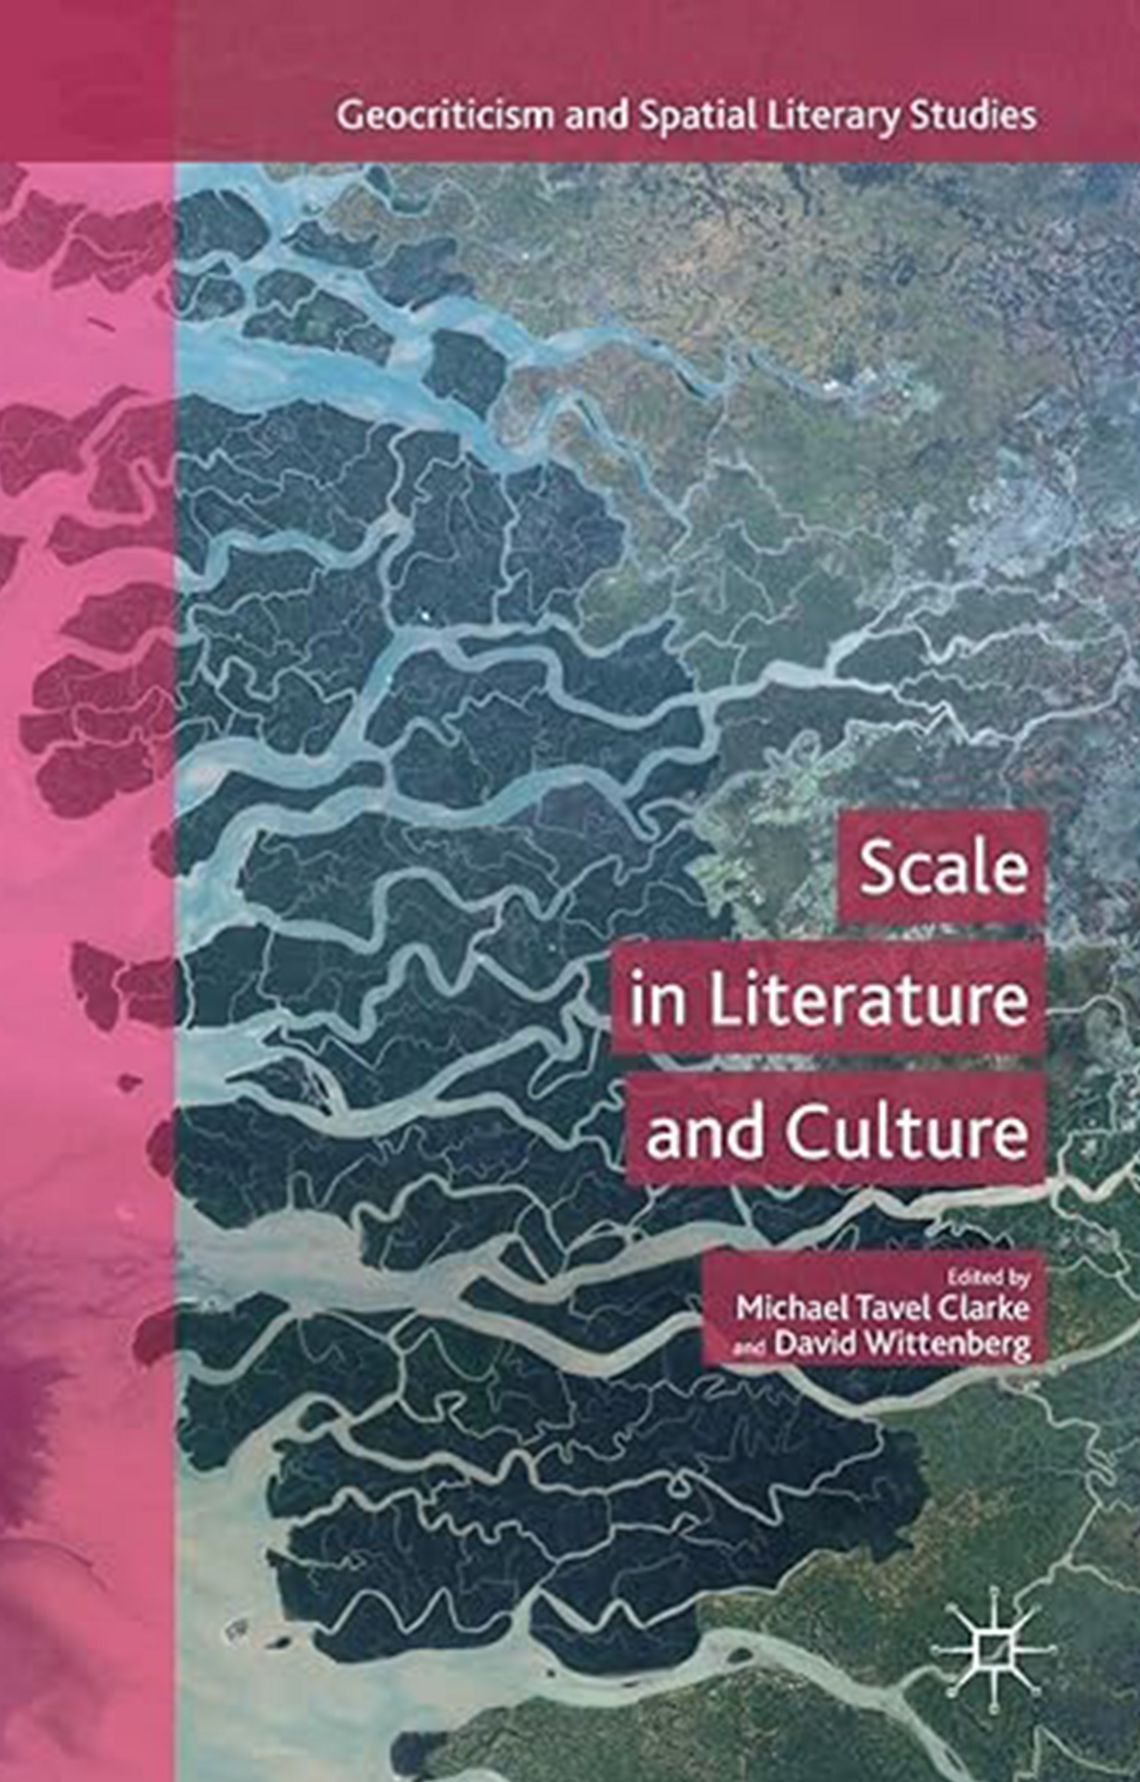 Scale in Literature and Culture Hardcover – Dec 20 2017 by Michael Tavel Clarke (Editor), David Wittenberg (Editor)